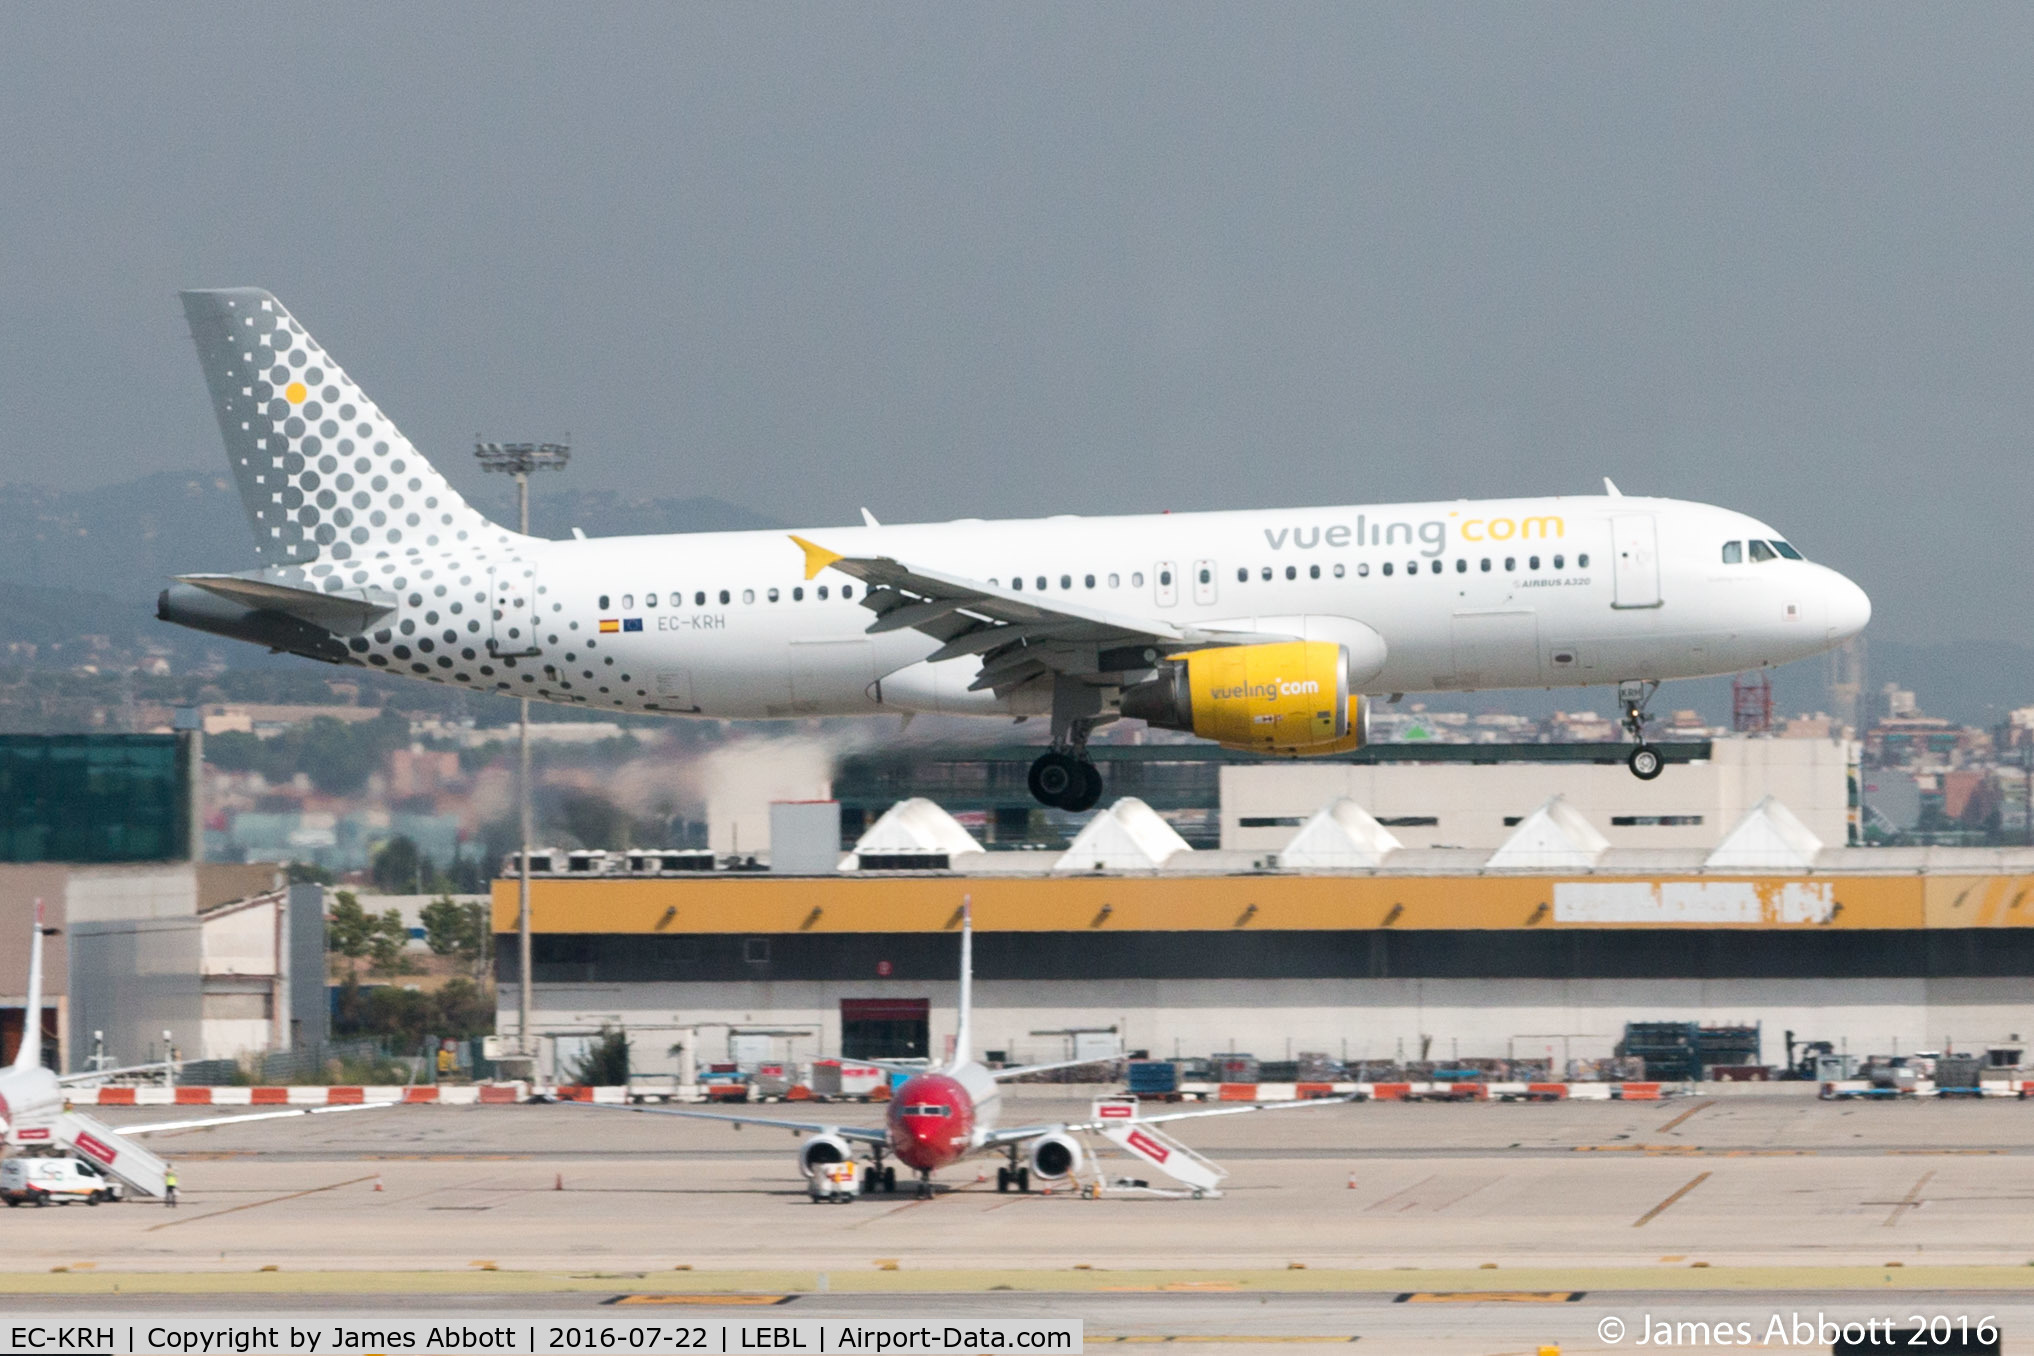 EC-KRH, 2008 Airbus A320-214 C/N 3529, About to land in Barcelona